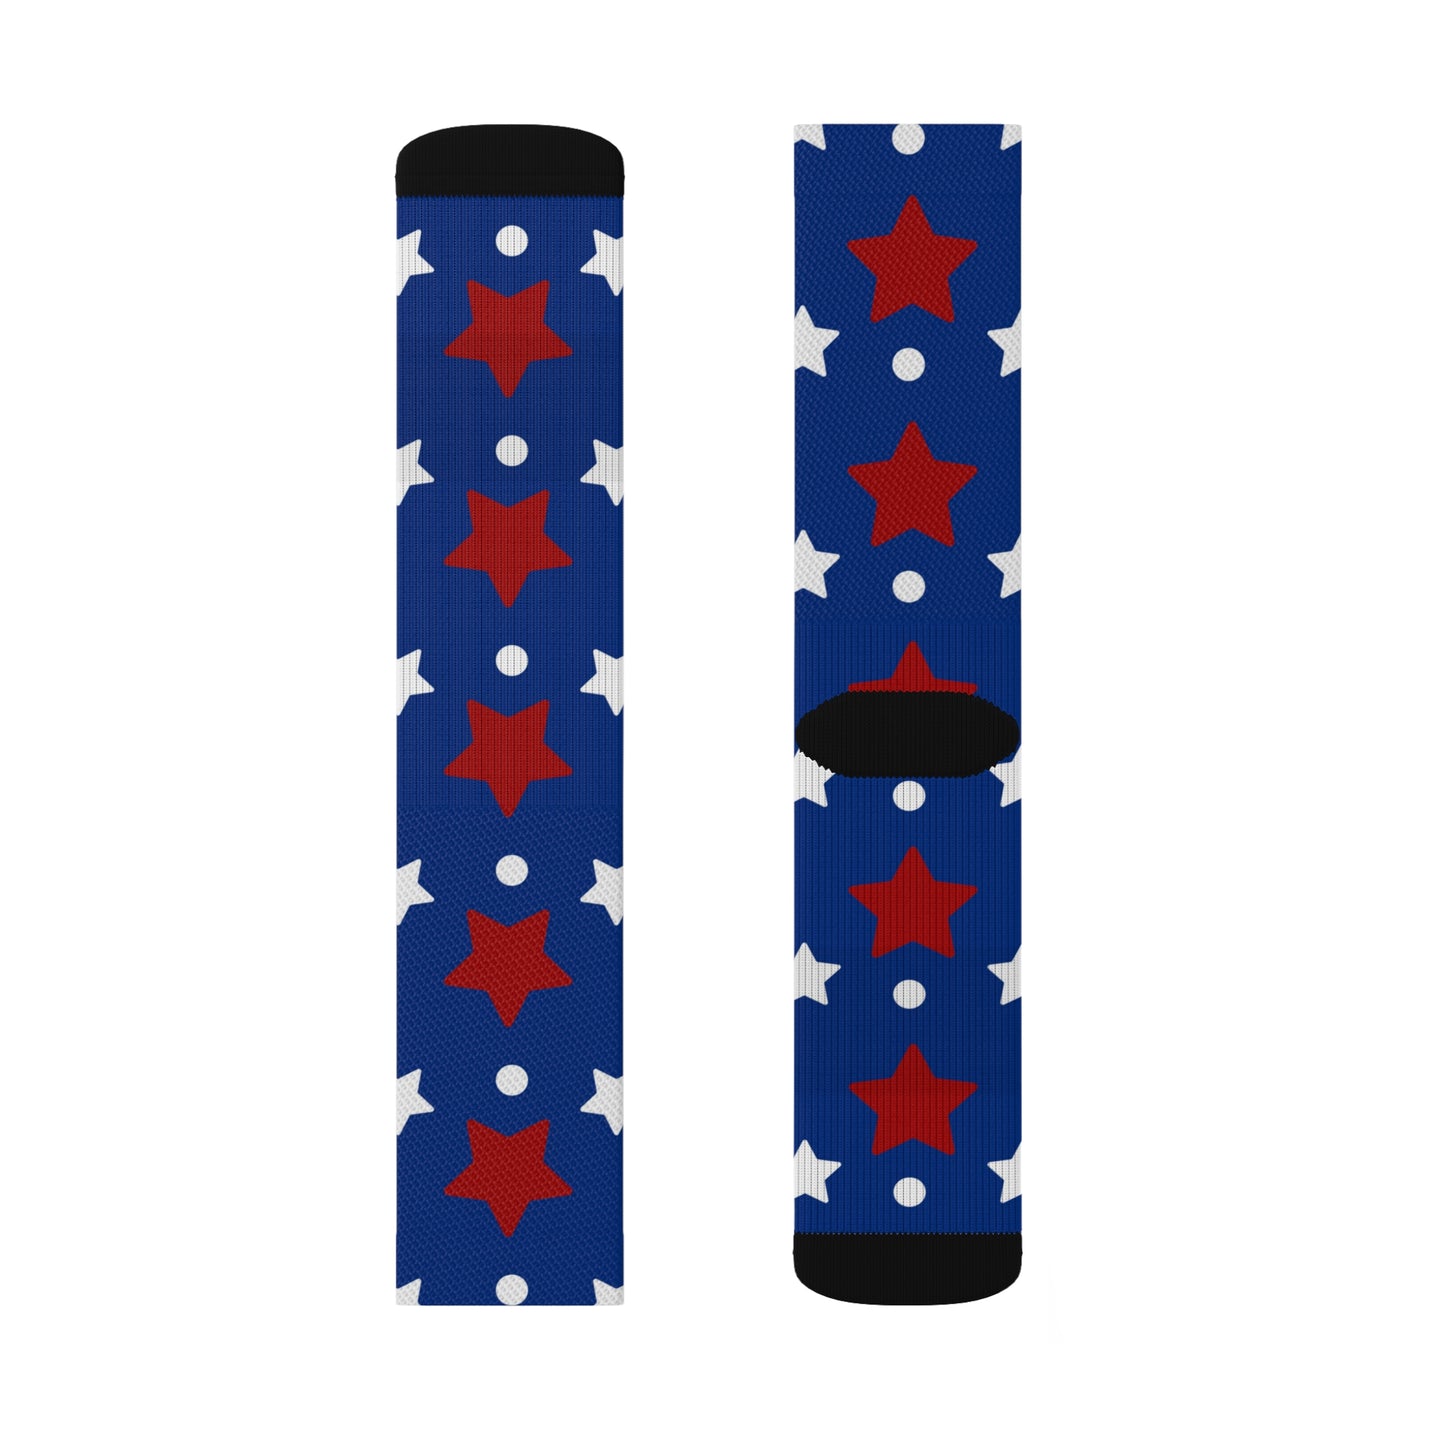 All Over Print Socks, Abstract Style, Paint Design, 4th of July Style